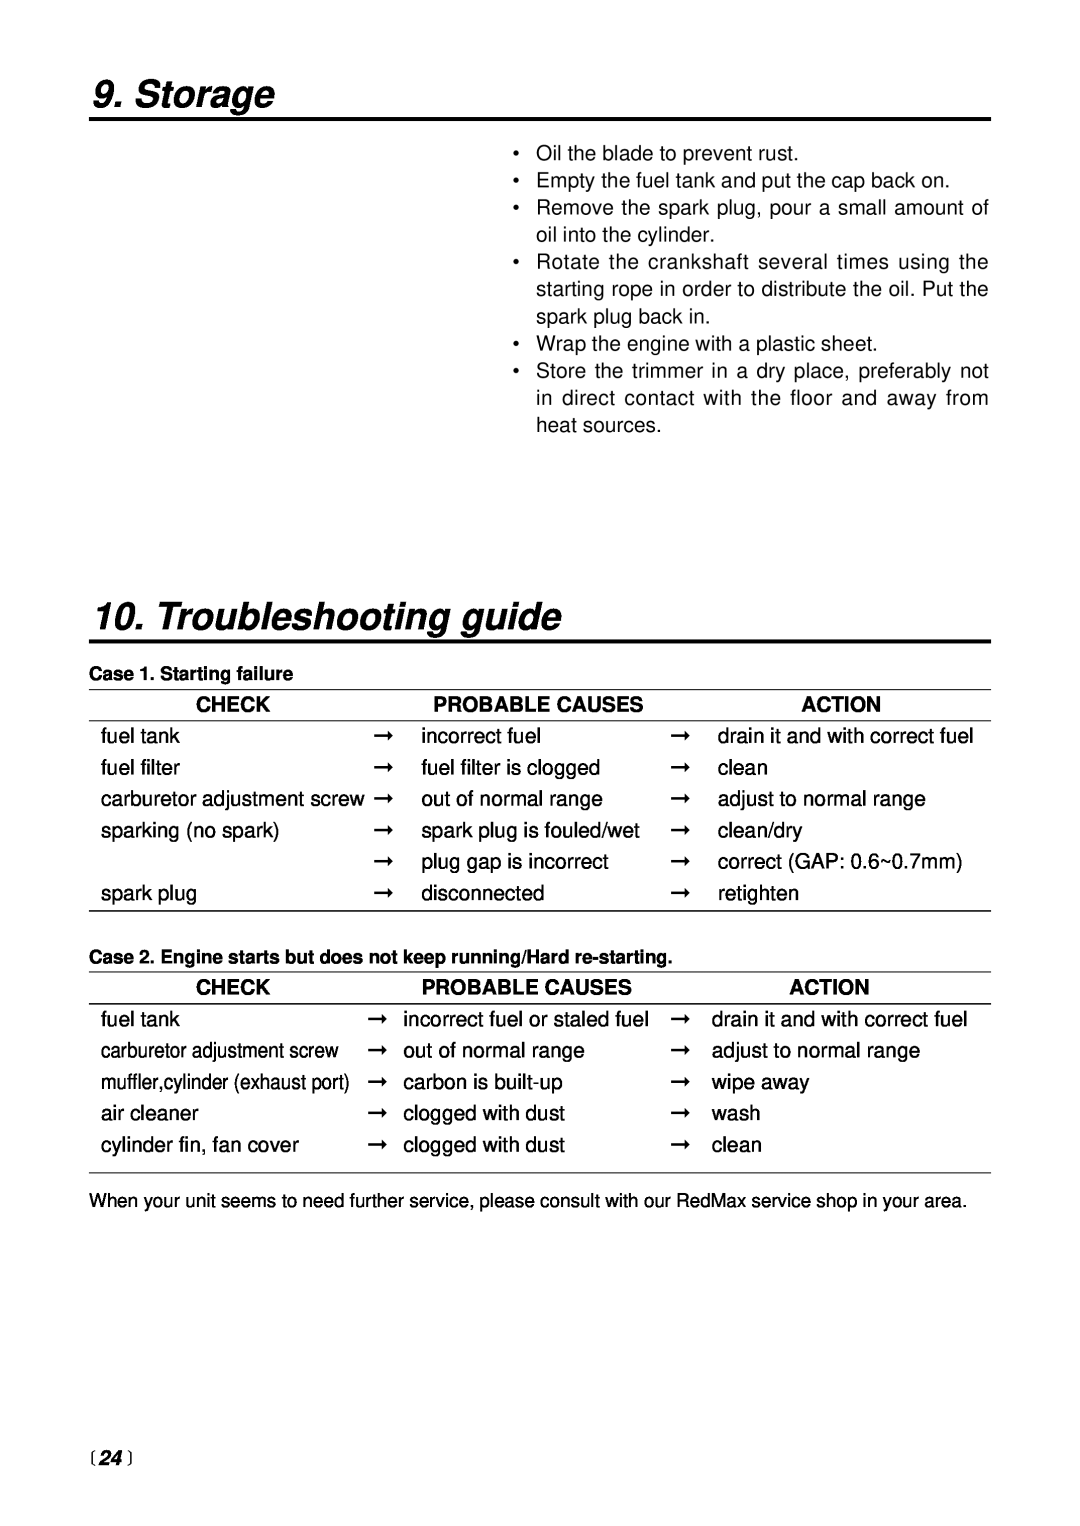 RedMax CHTZ2500 manual Storage, Troubleshooting guide,  24  